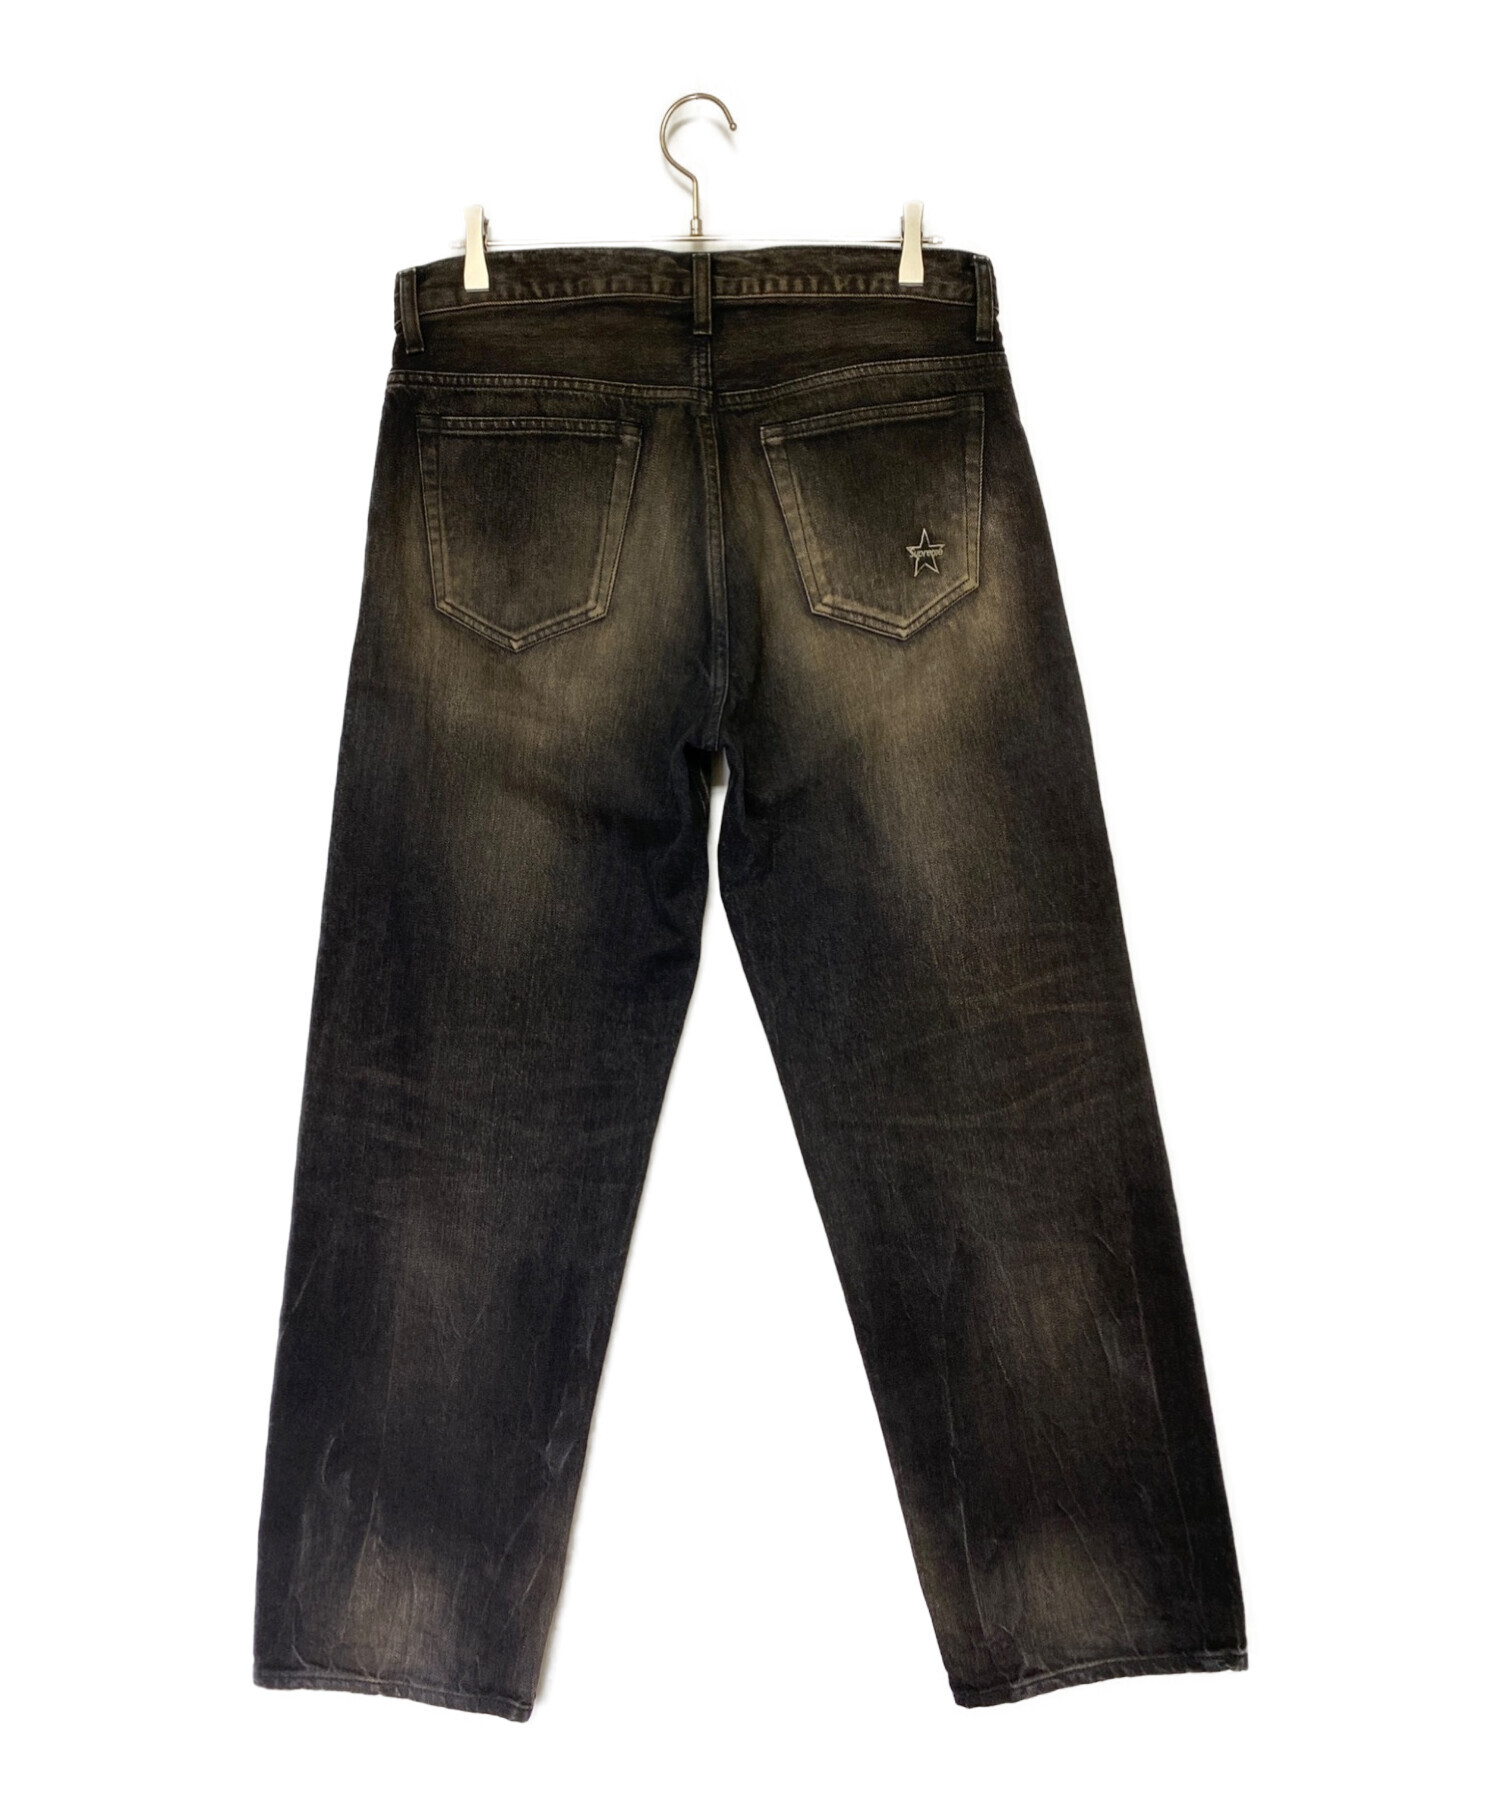 Distressed Loose Fit Selvedge Jean 32Sup - デニム/ジーンズ